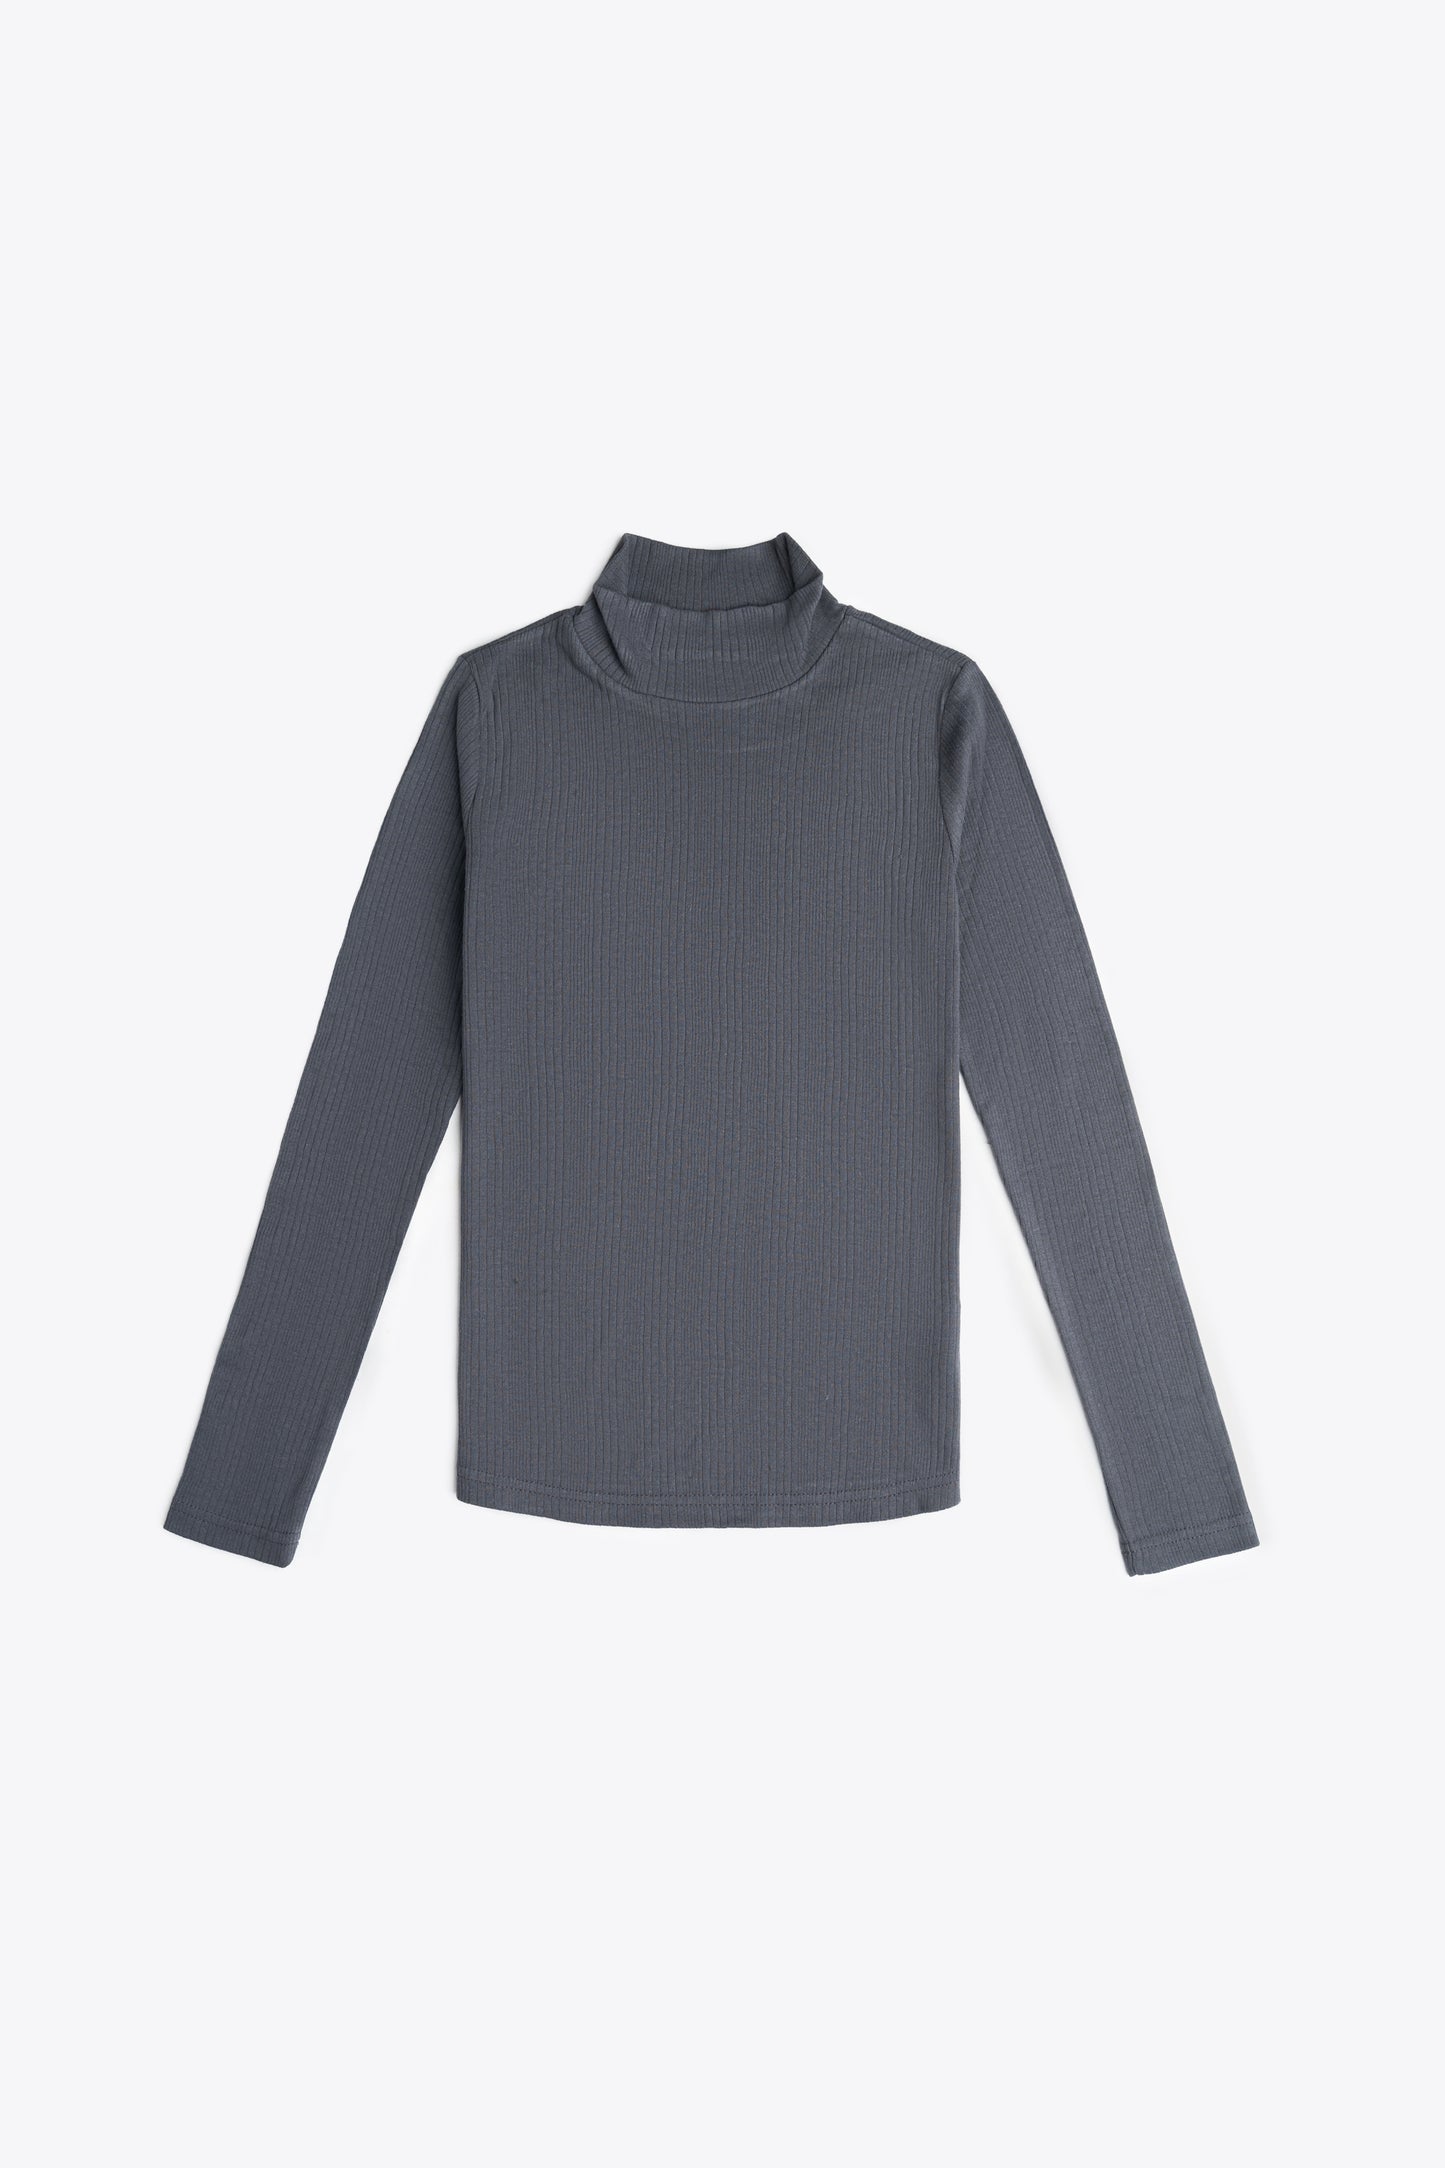 Mock Neck in Charcoal